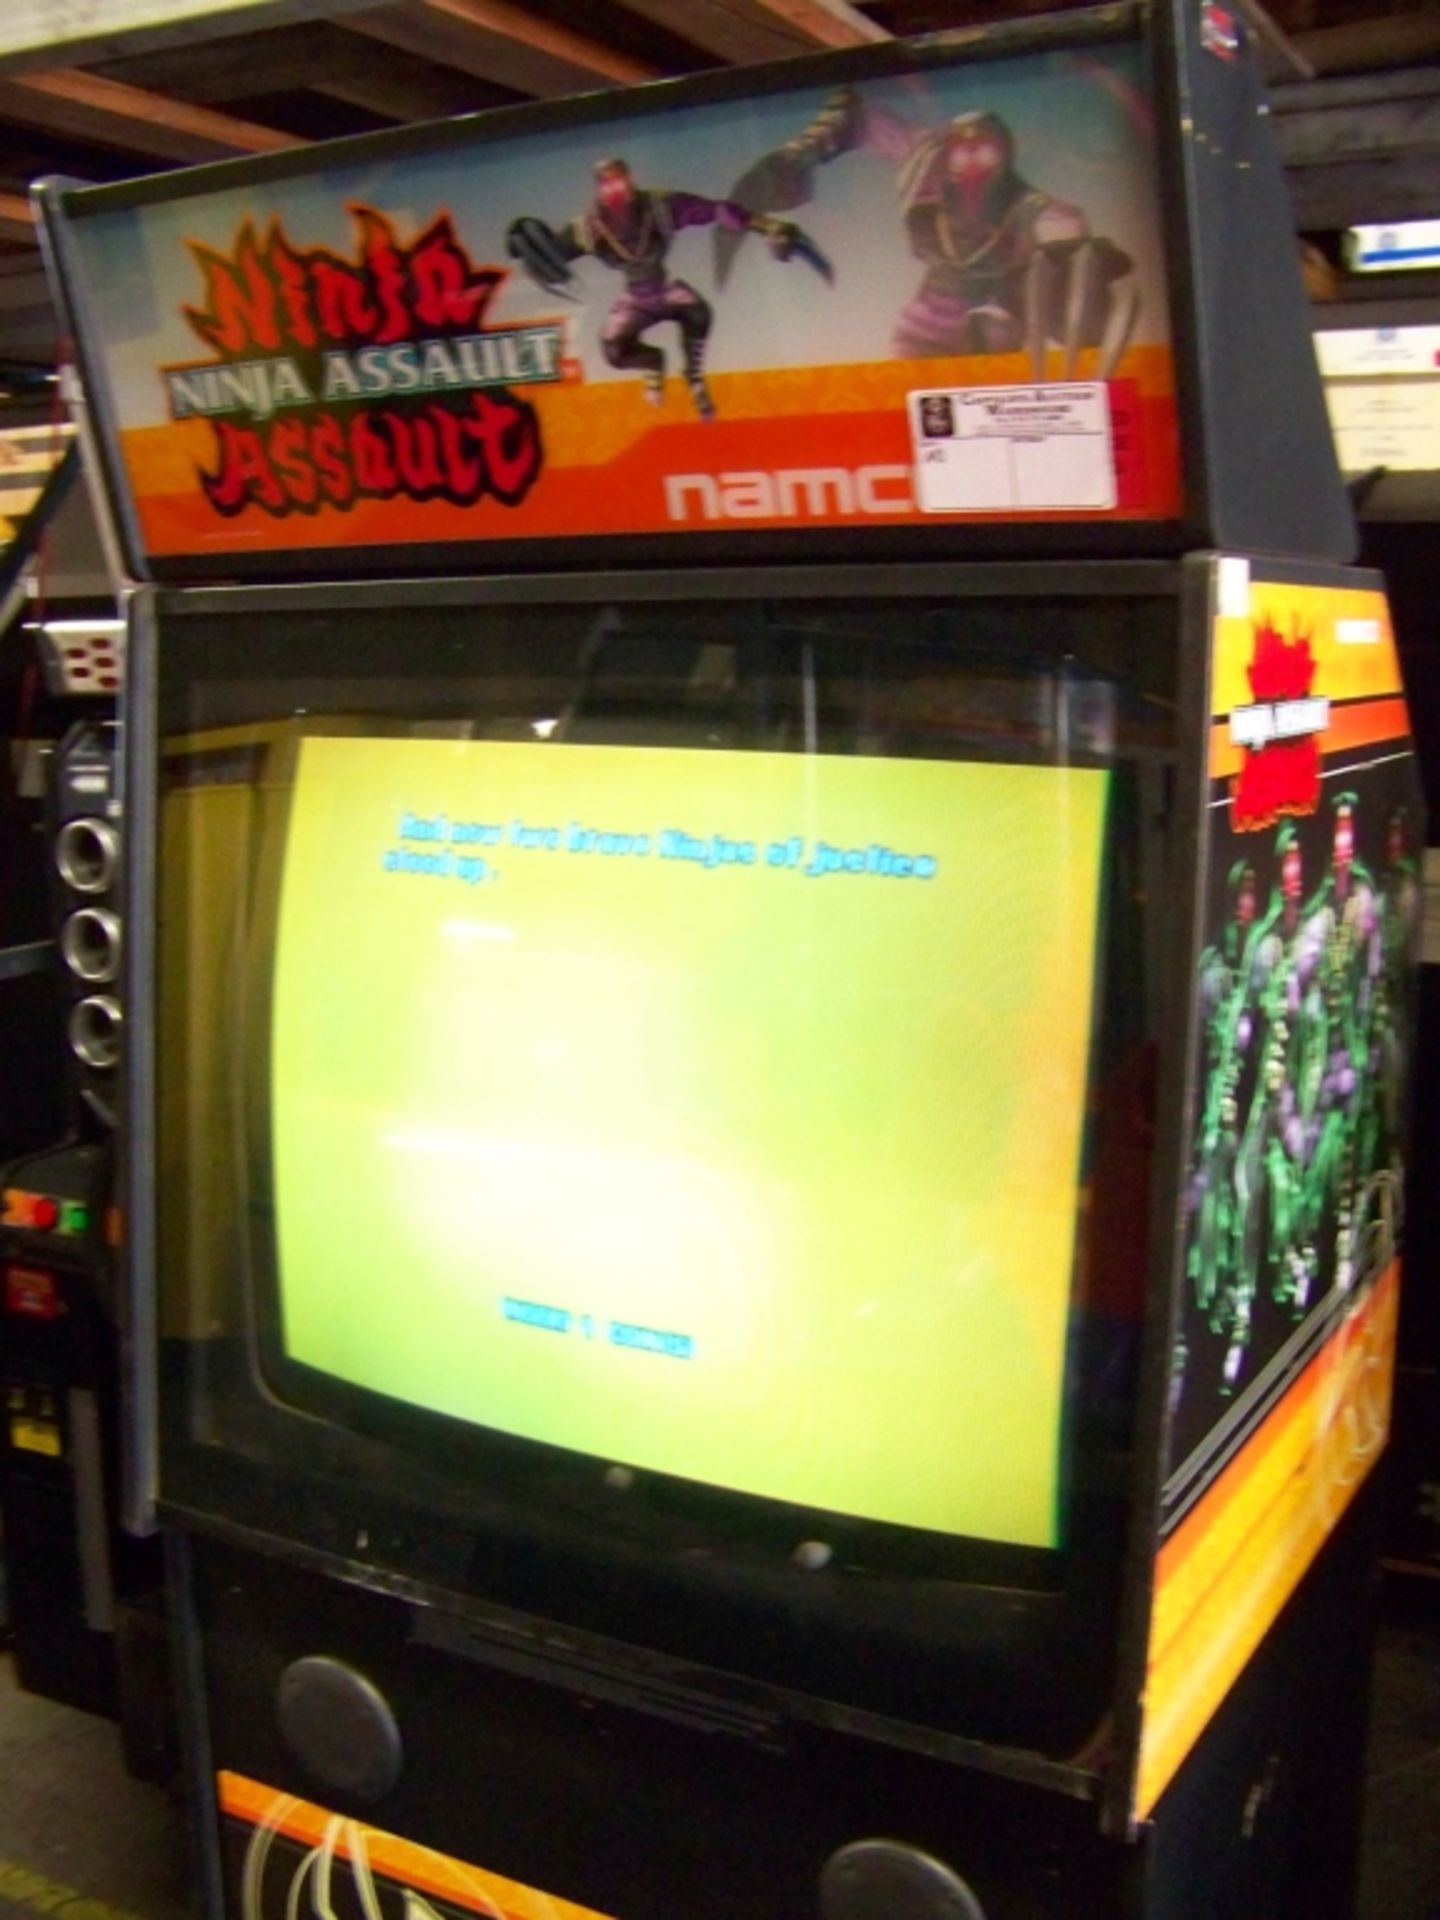 NINJA  ASSAULT DELUXE SHOOTER ARCADE GAME NAMCO - Image 3 of 6